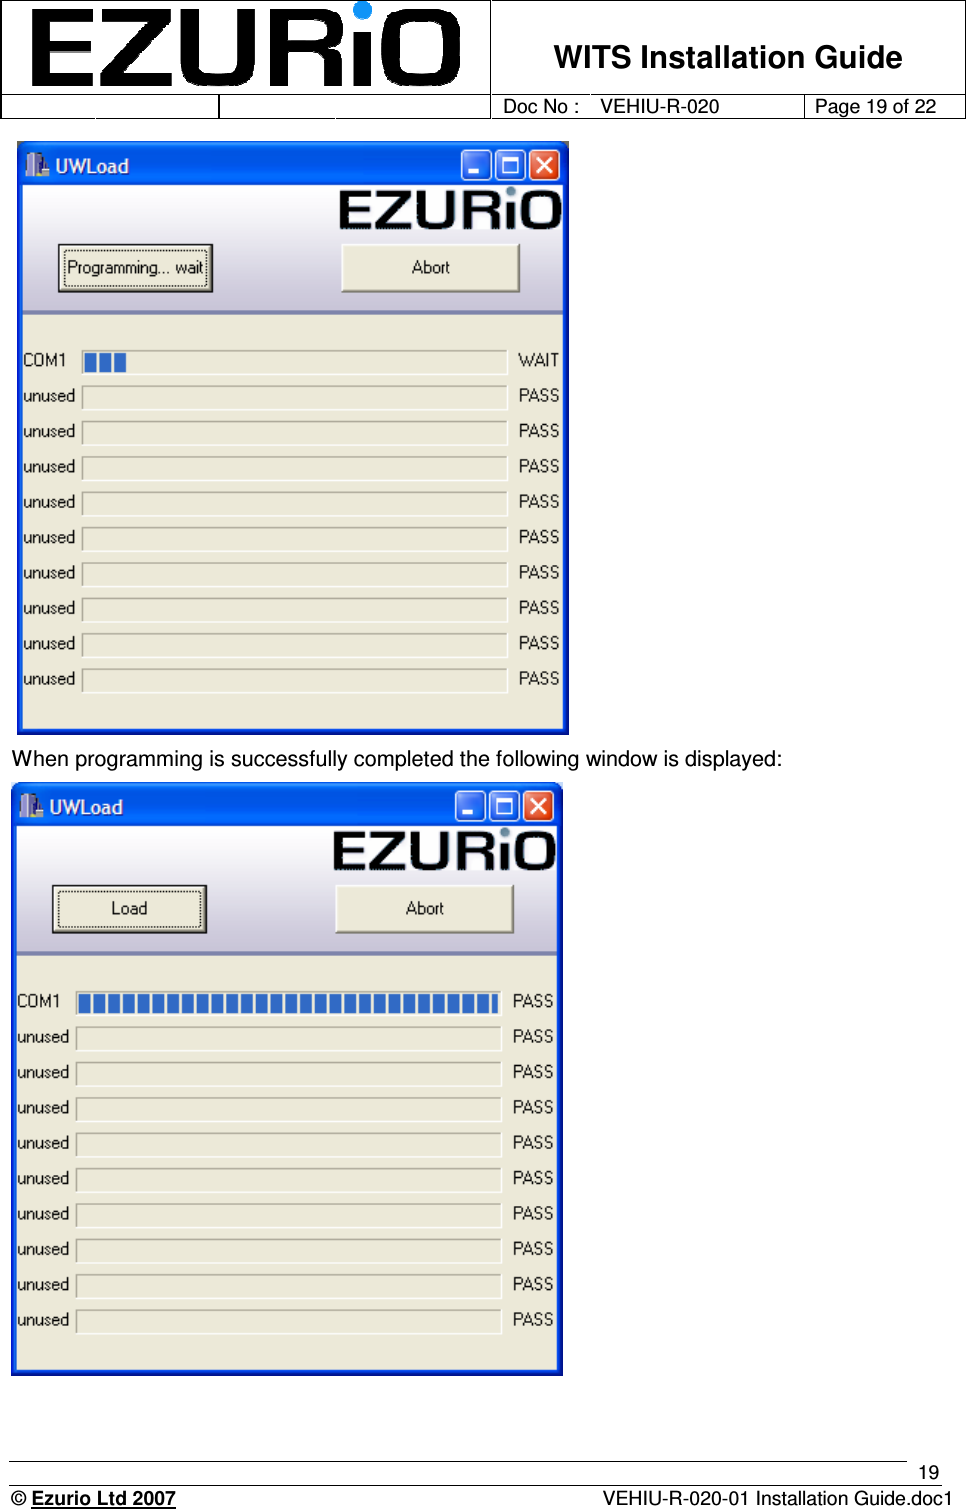    WITS Installation Guide         Doc No : VEHIU-R-020 Page 19 of 22      © Ezurio Ltd 2007  VEHIU-R-020-01 Installation Guide.doc1 19  When programming is successfully completed the following window is displayed:  